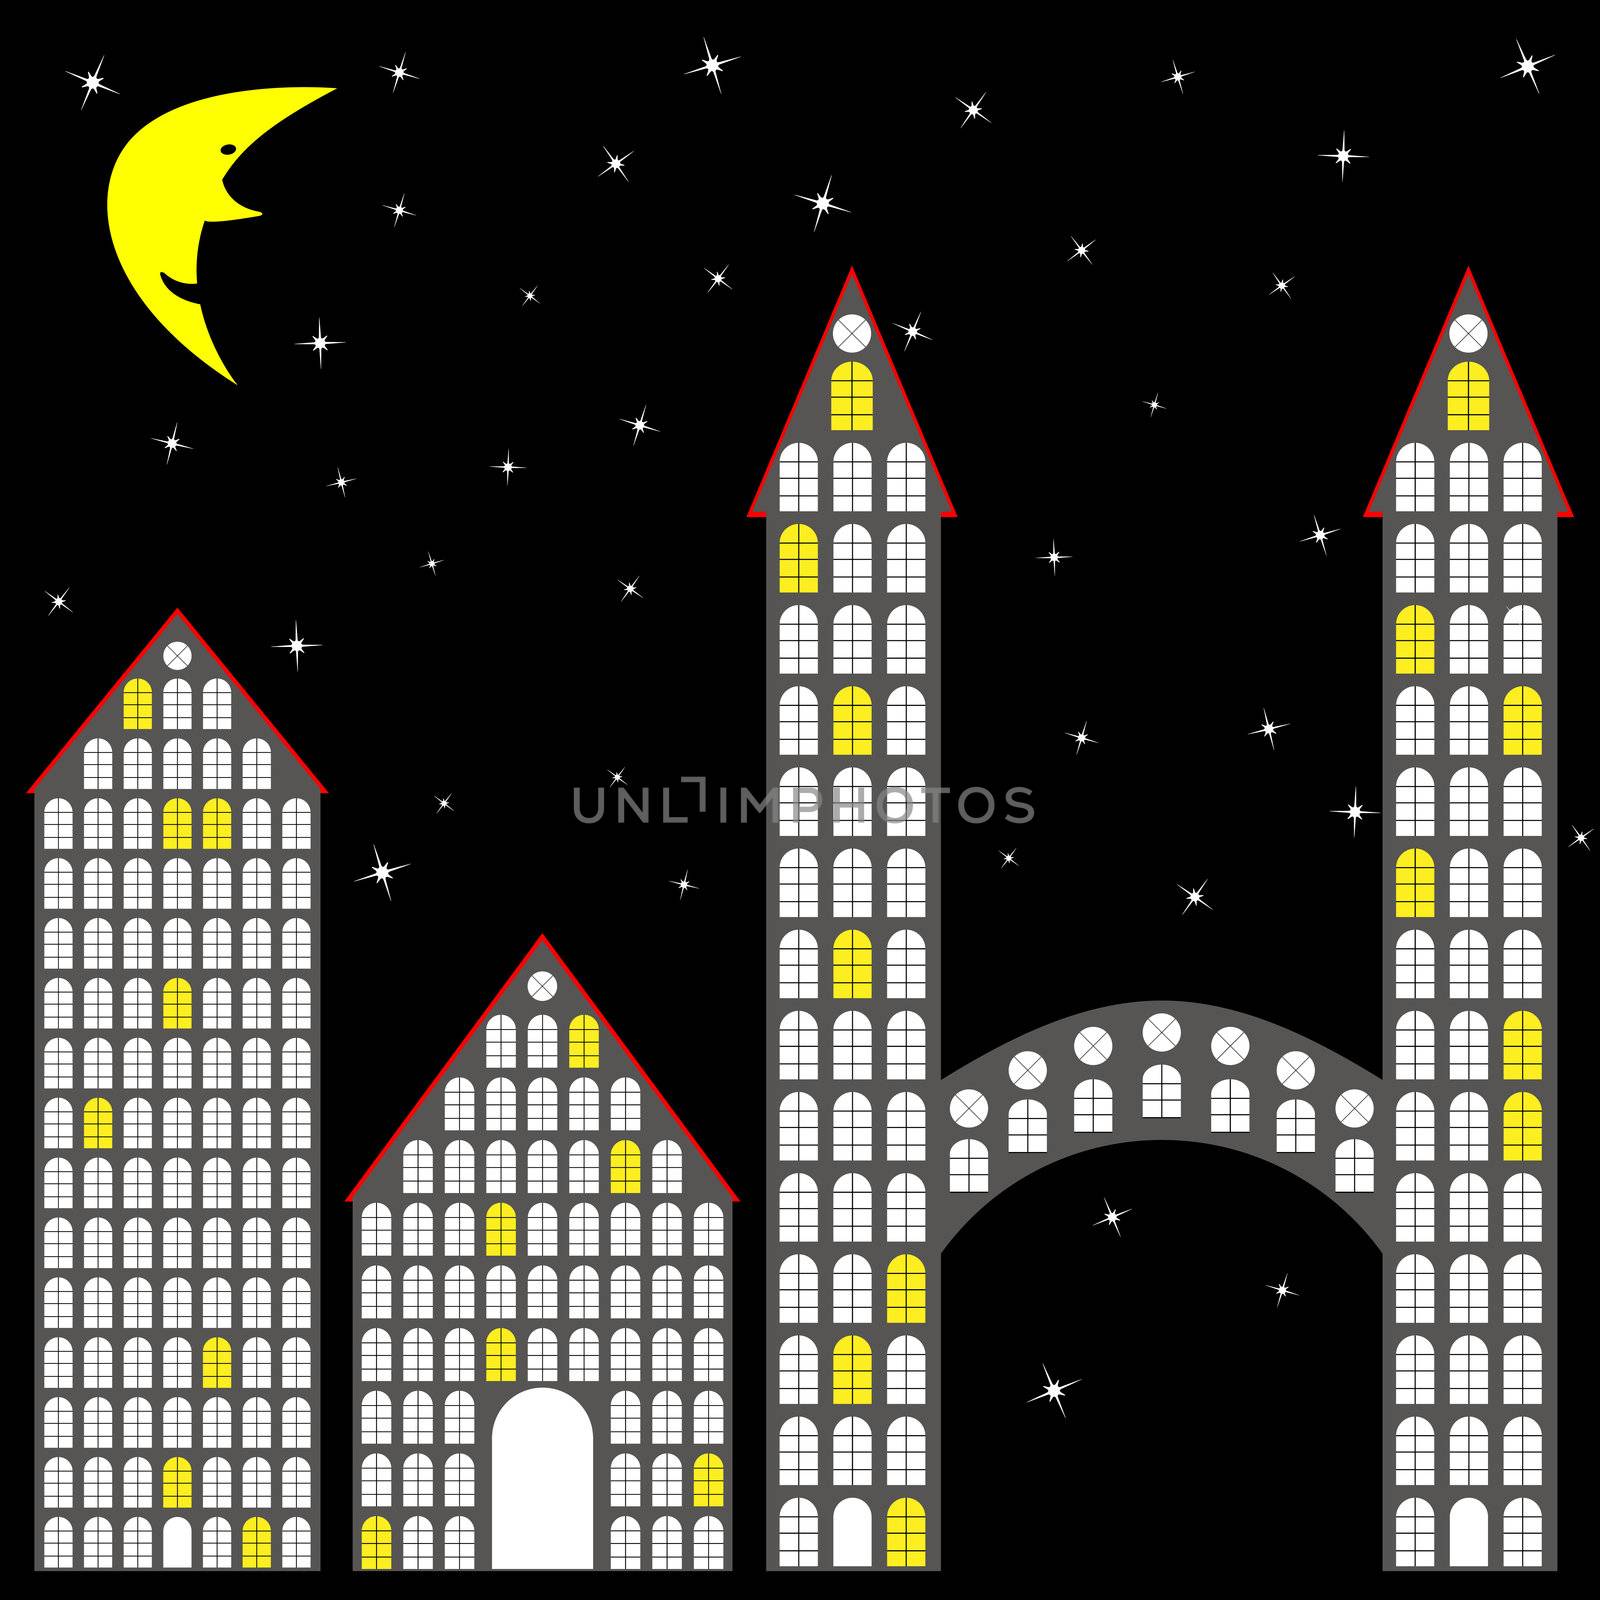 blocks and houses, abstract vector art illustration